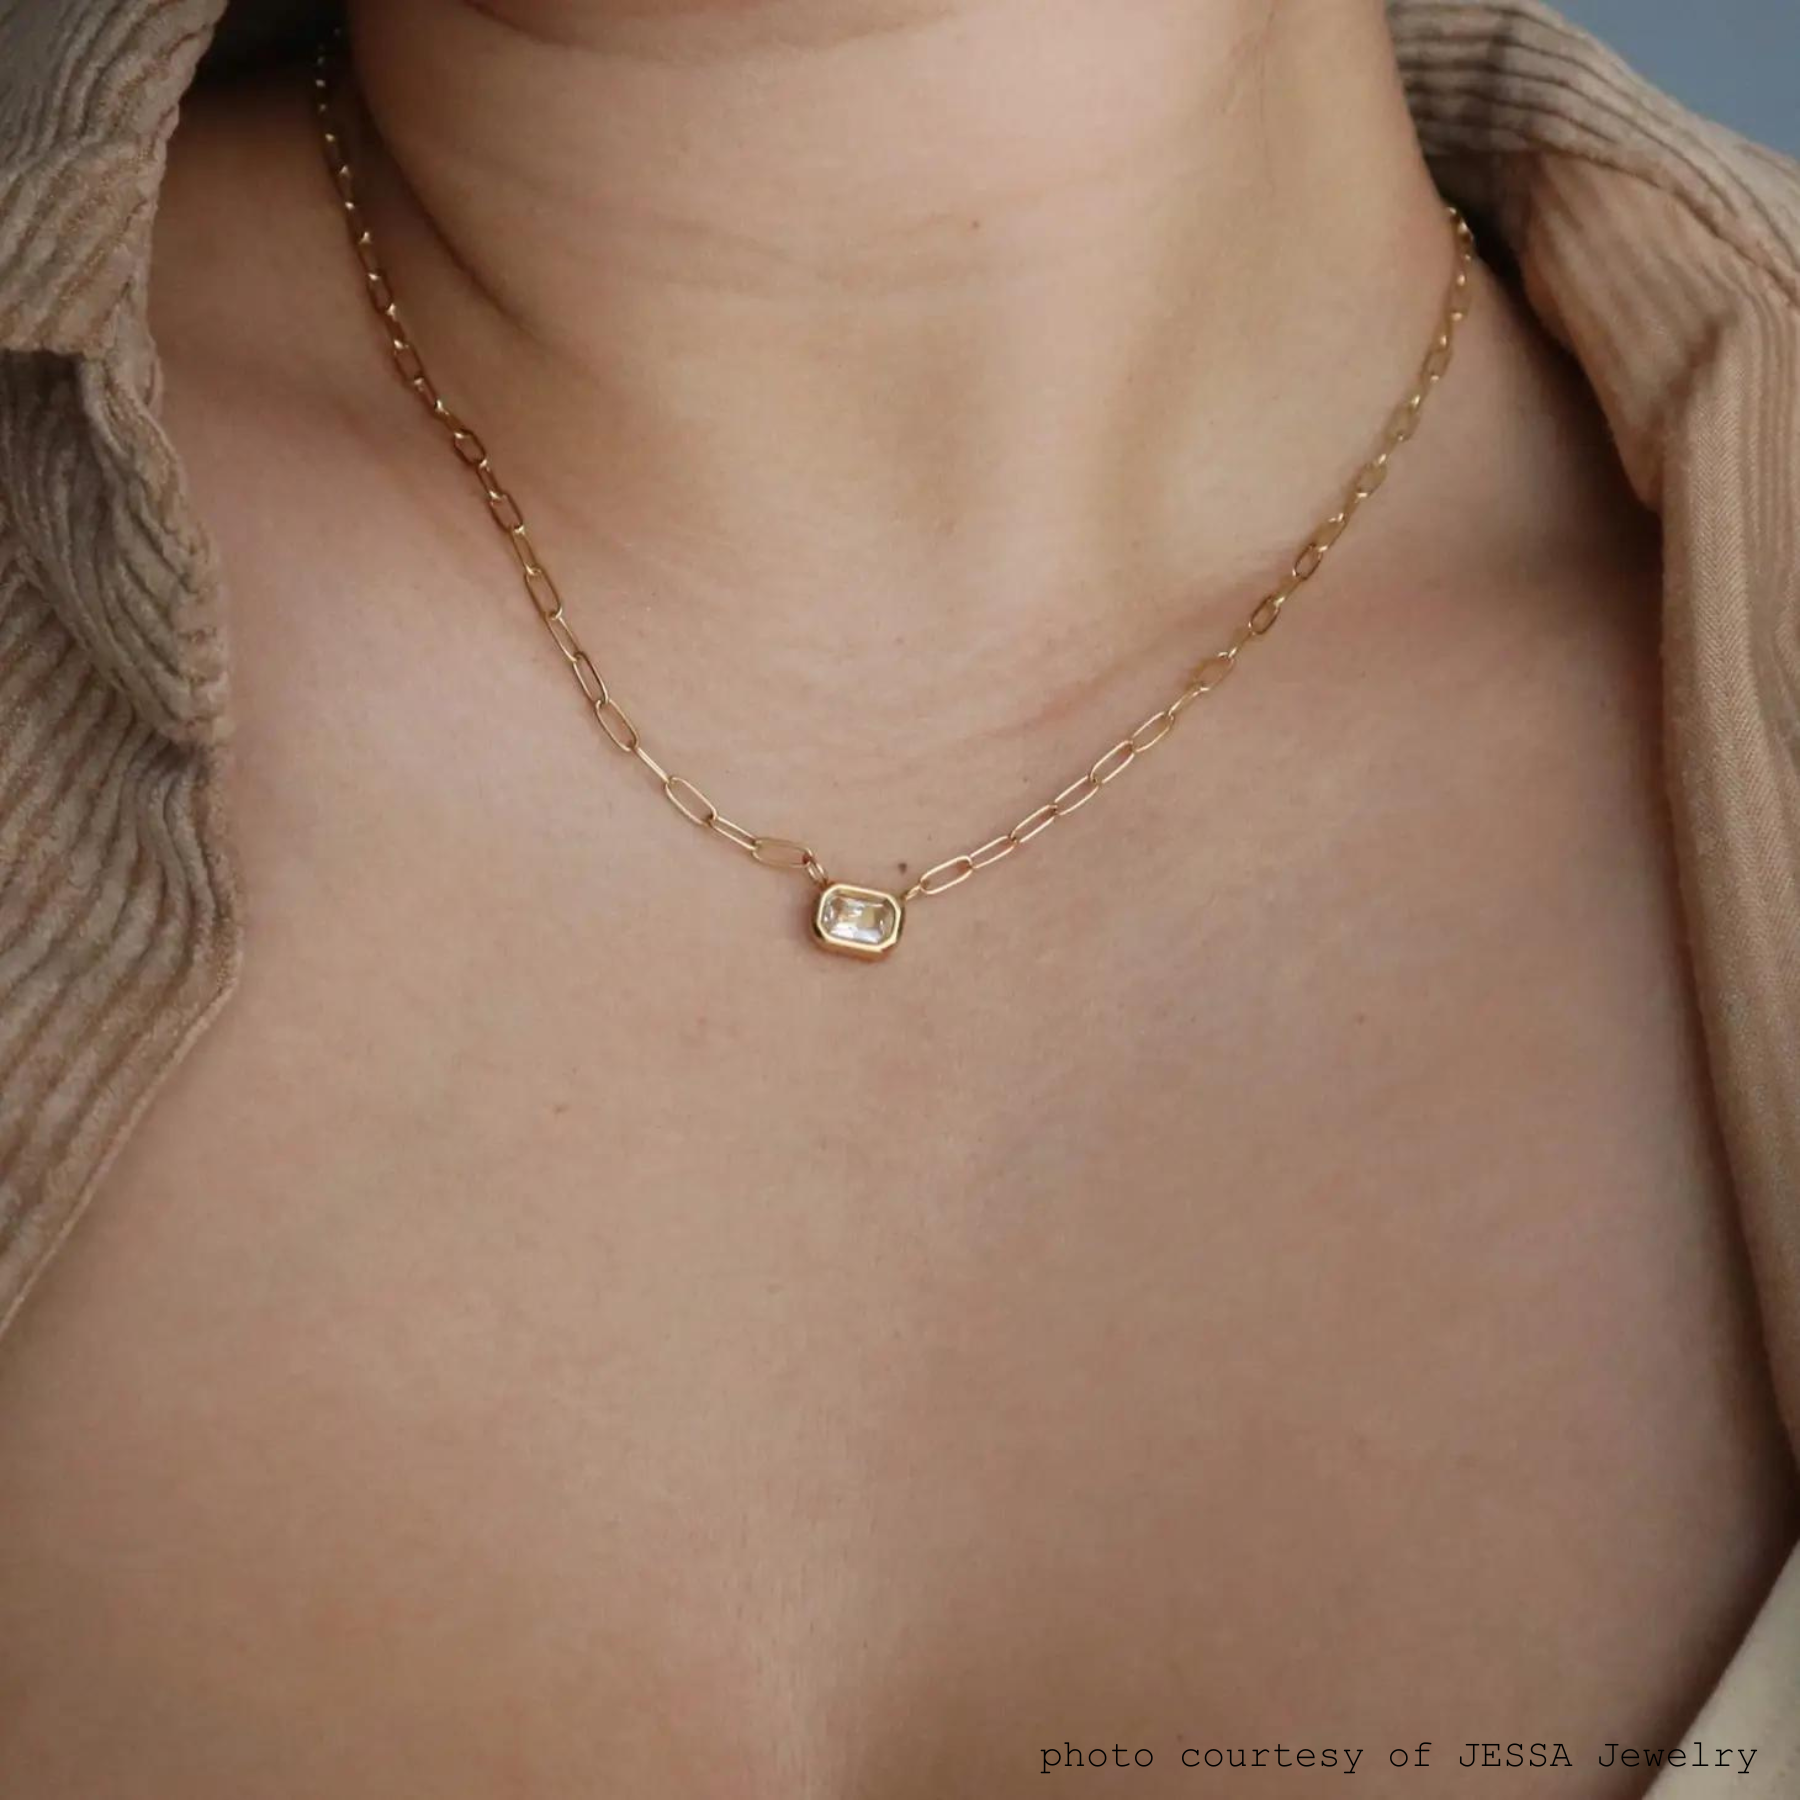 The Rectangular Gem Paperclip Pendant Necklace by Jessa Jewelry sold at Harbour Thread